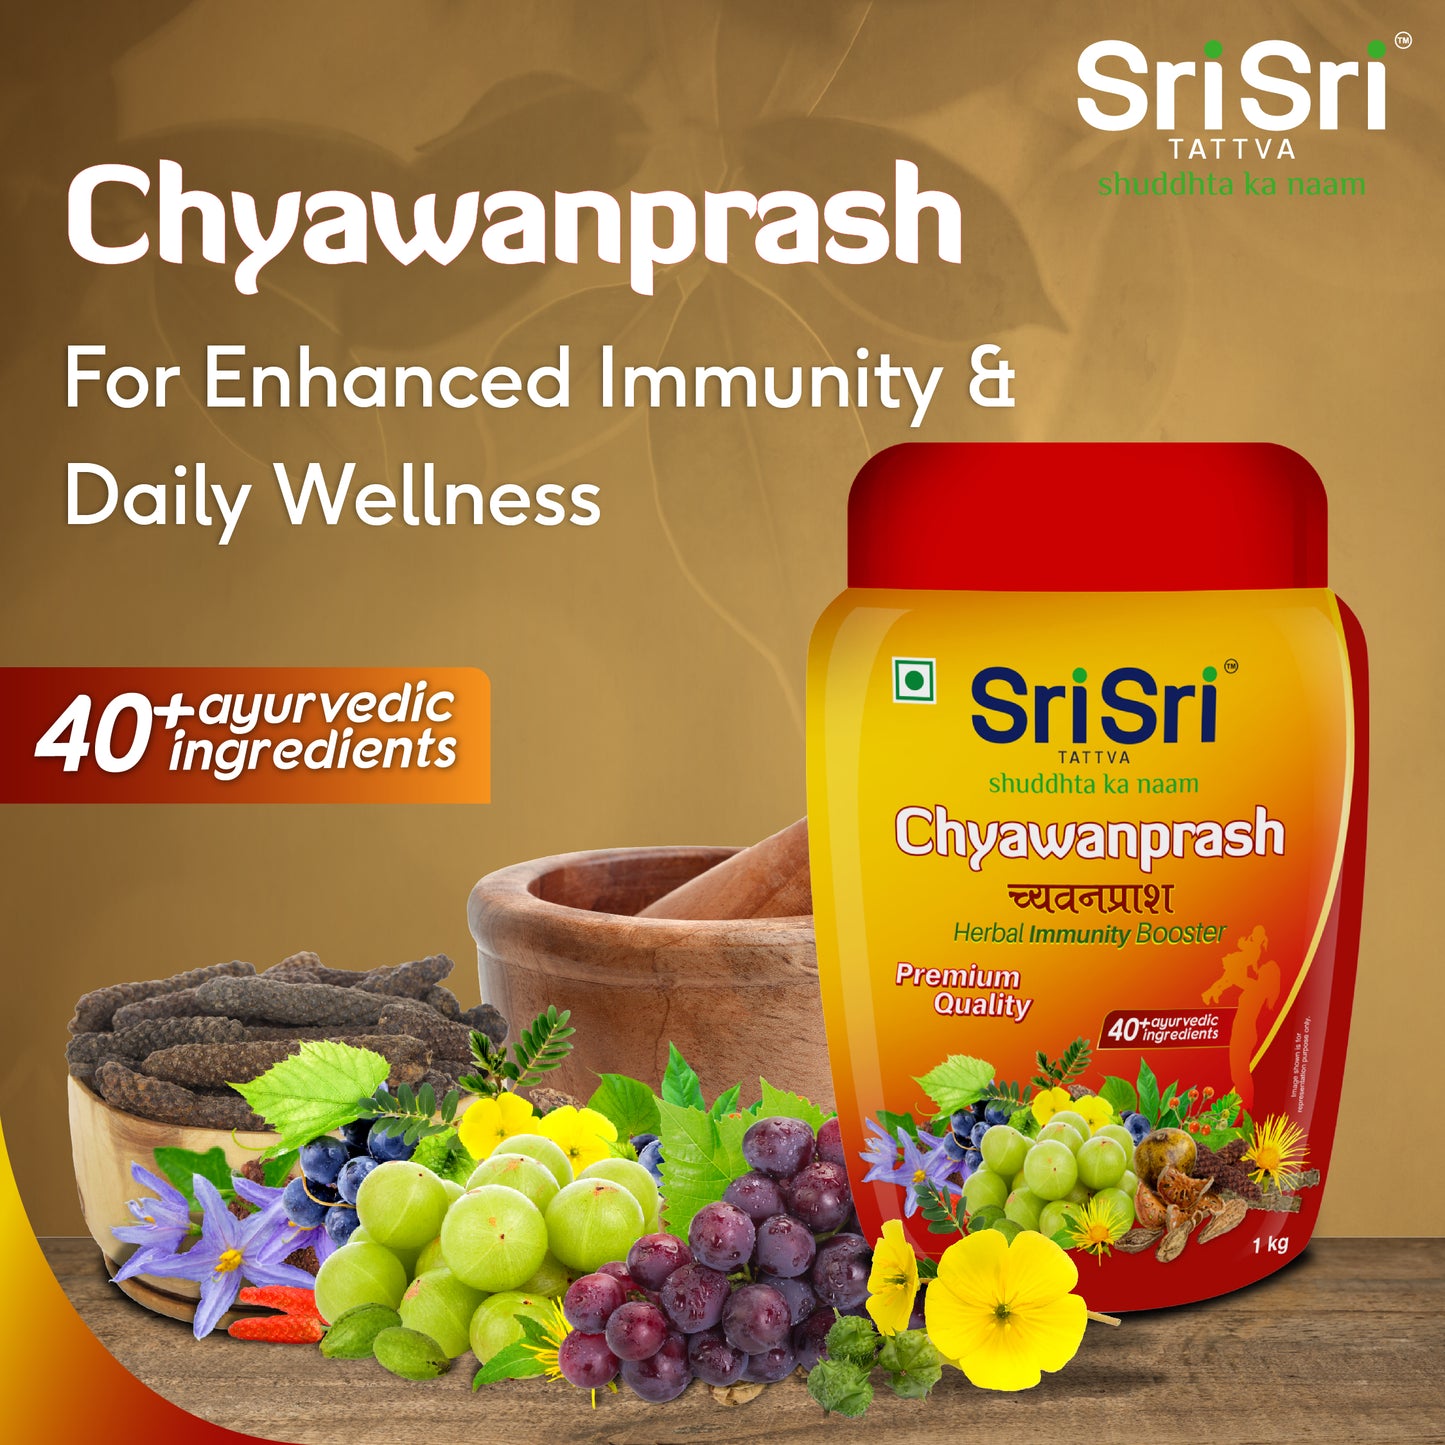 Chyawanprash - Herbal Immunity Booster with 40+ Ayurvedic Ingredients for Better Strength and Stamina, 1 kg